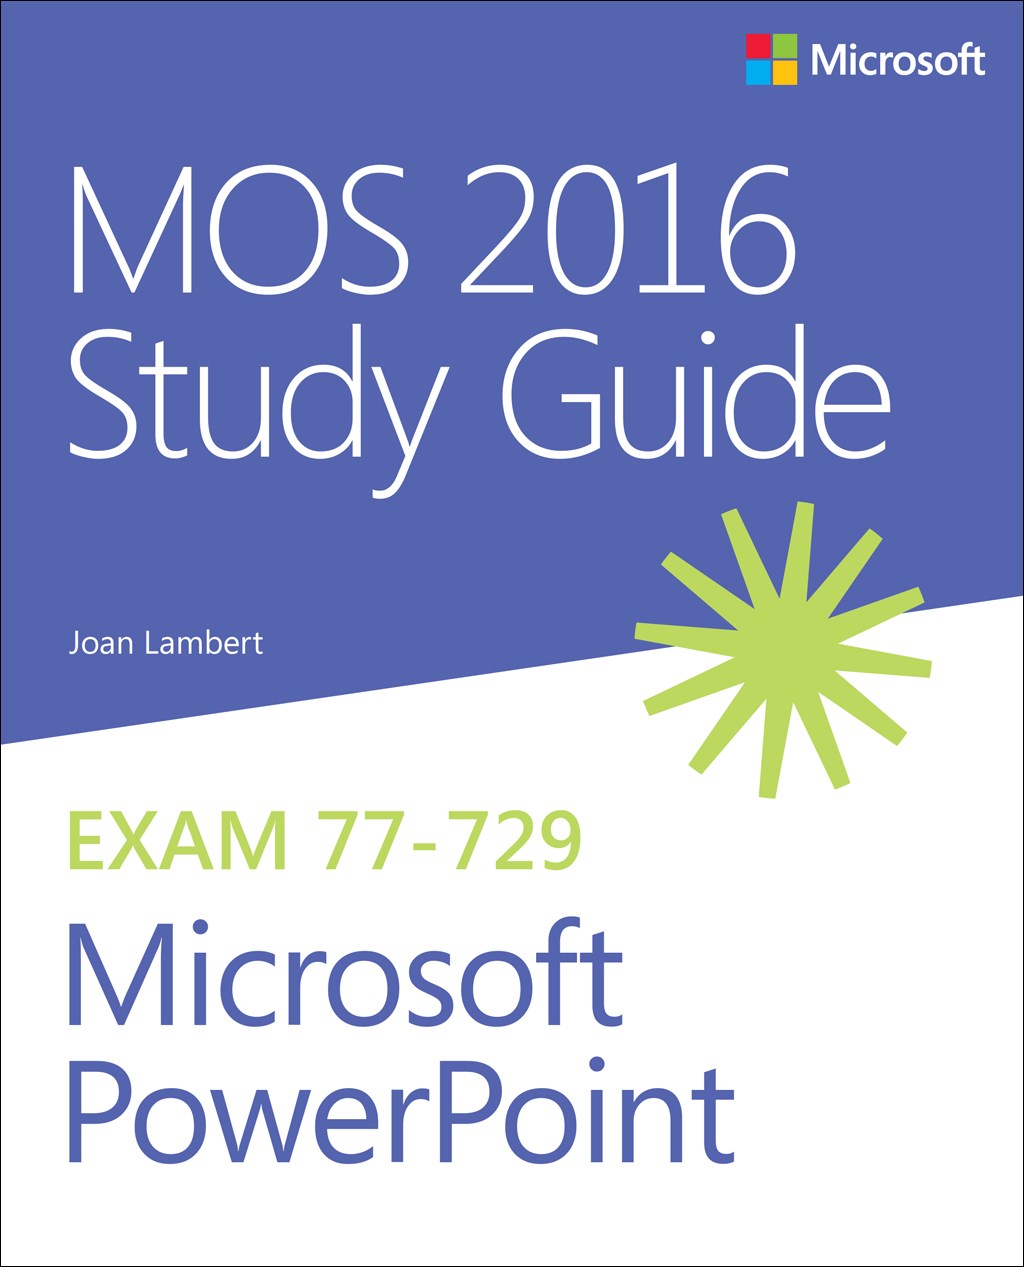 MOS 2016 Study Guide for Microsoft PowerPoint | Microsoft Press Store